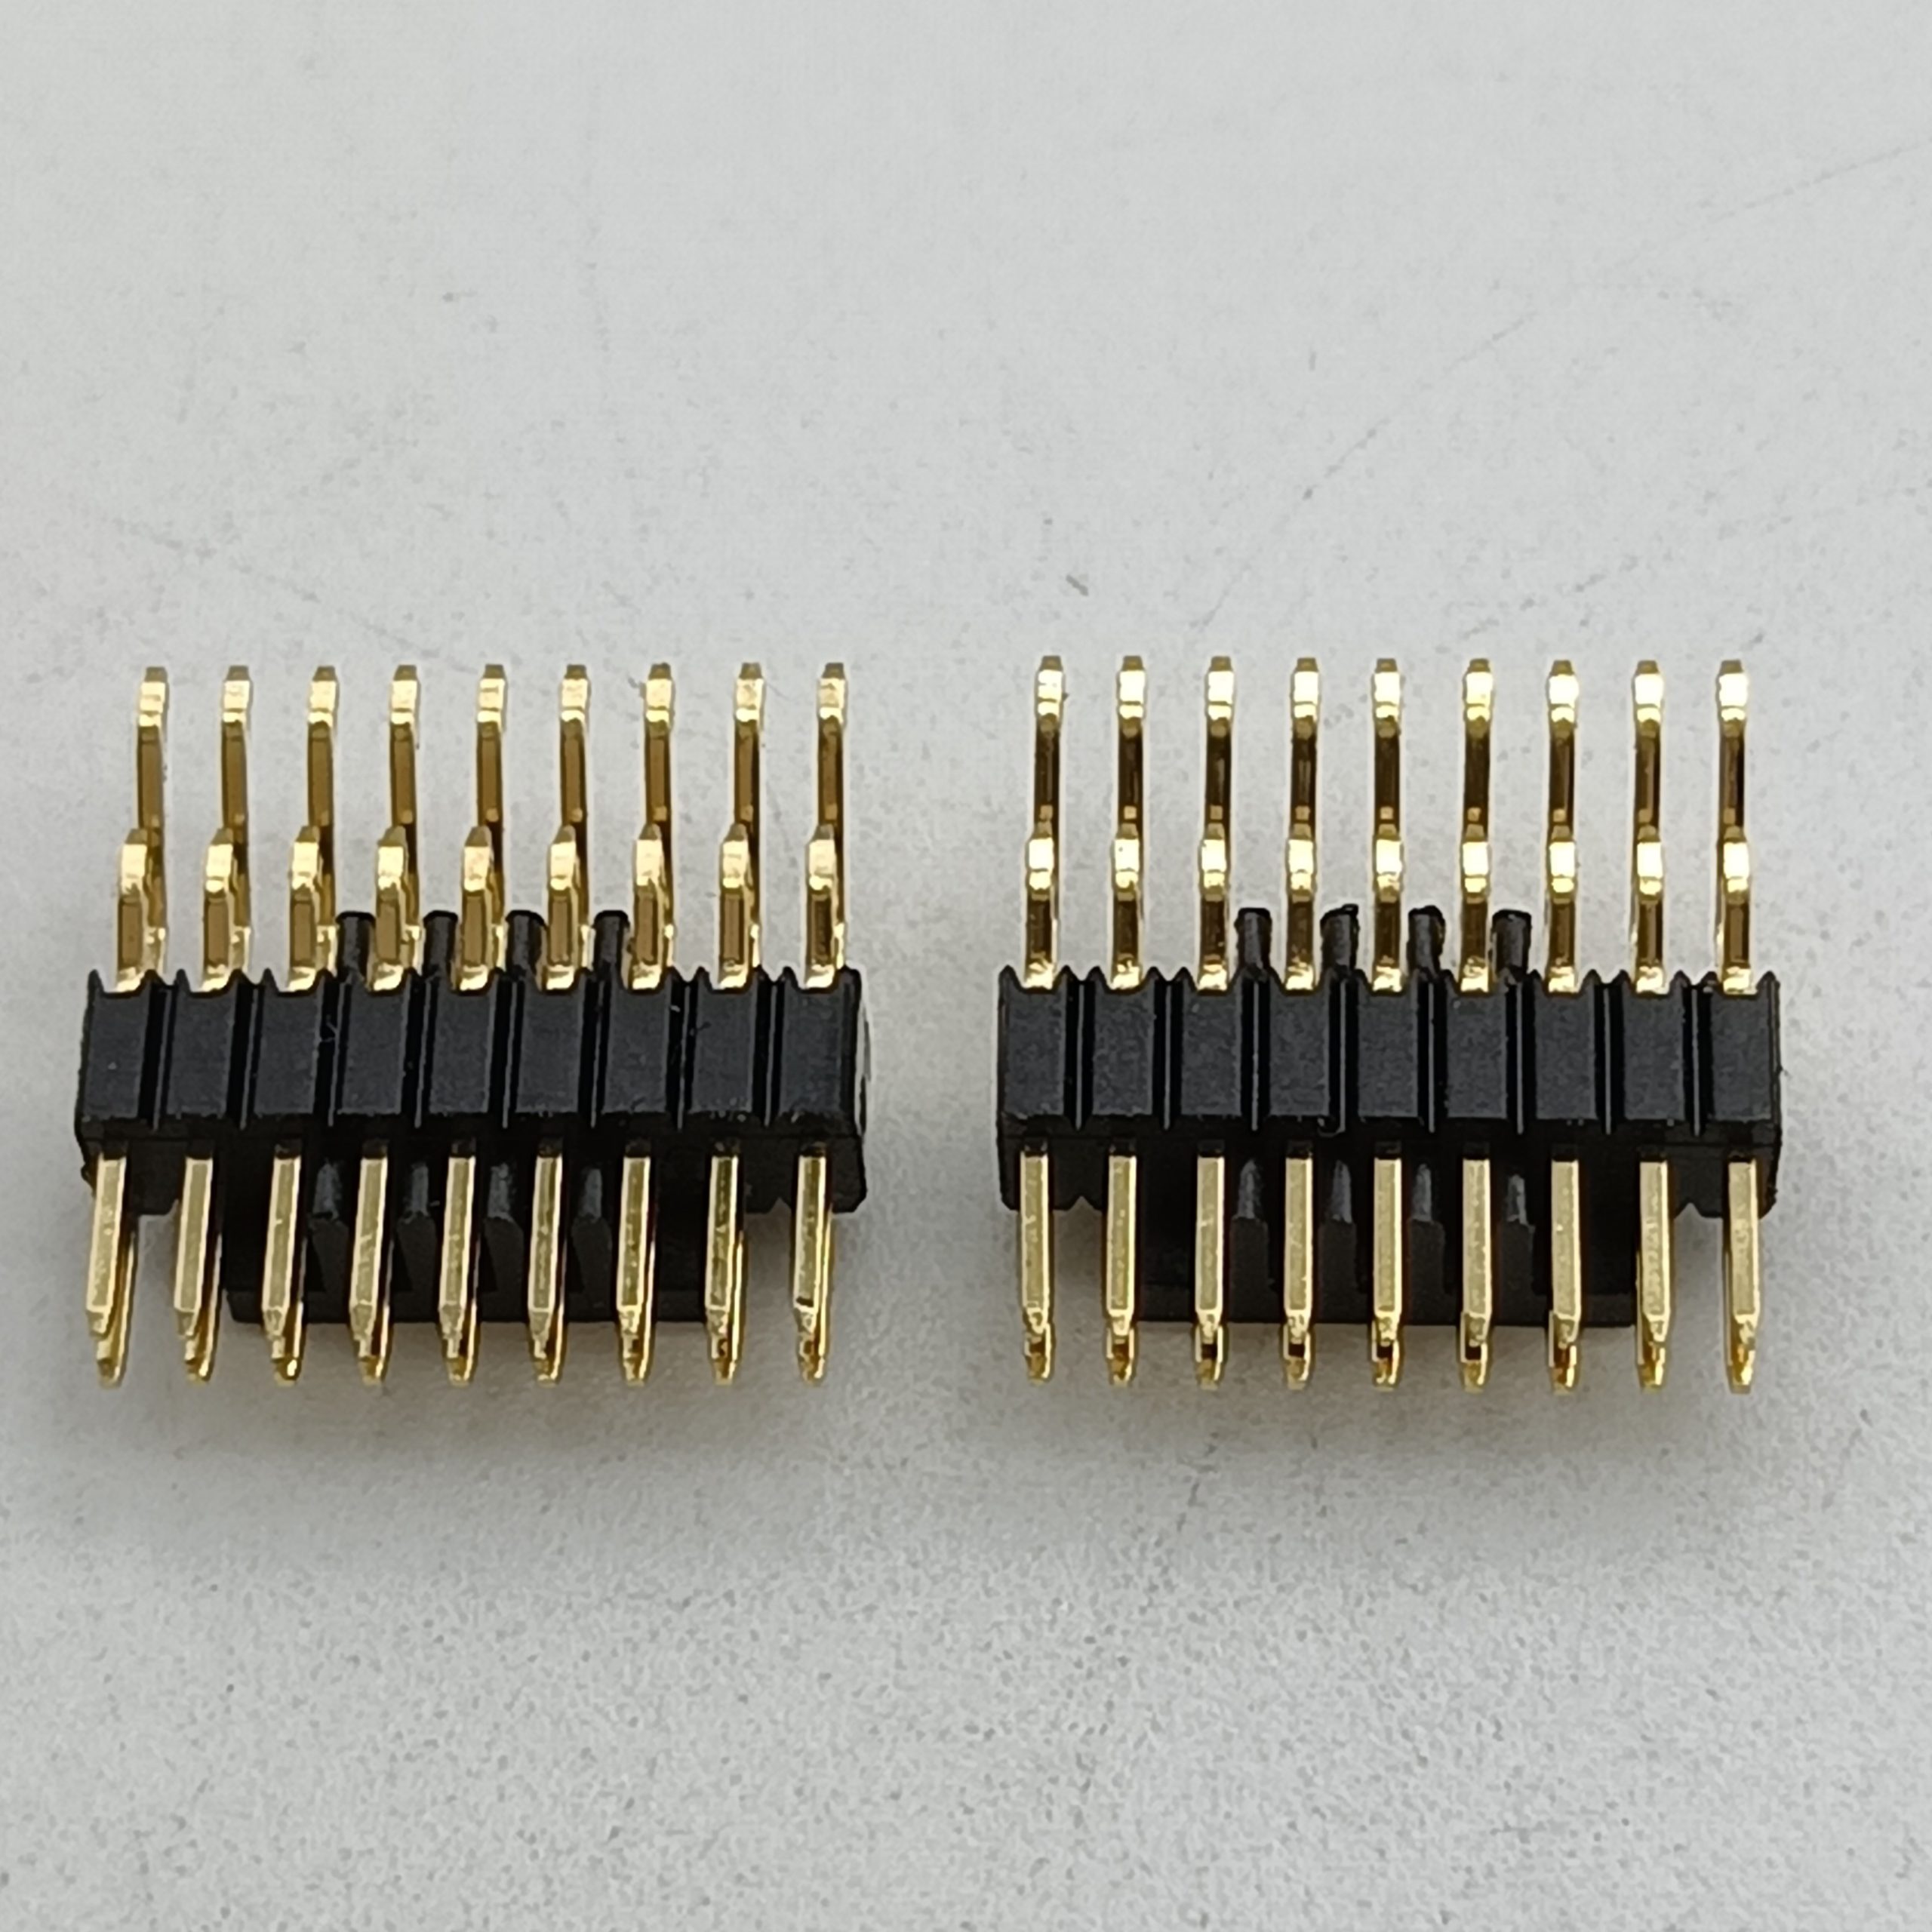 1.27 mm header typically refers to a type of electrical connector commonly used in electronics and circuitry. 